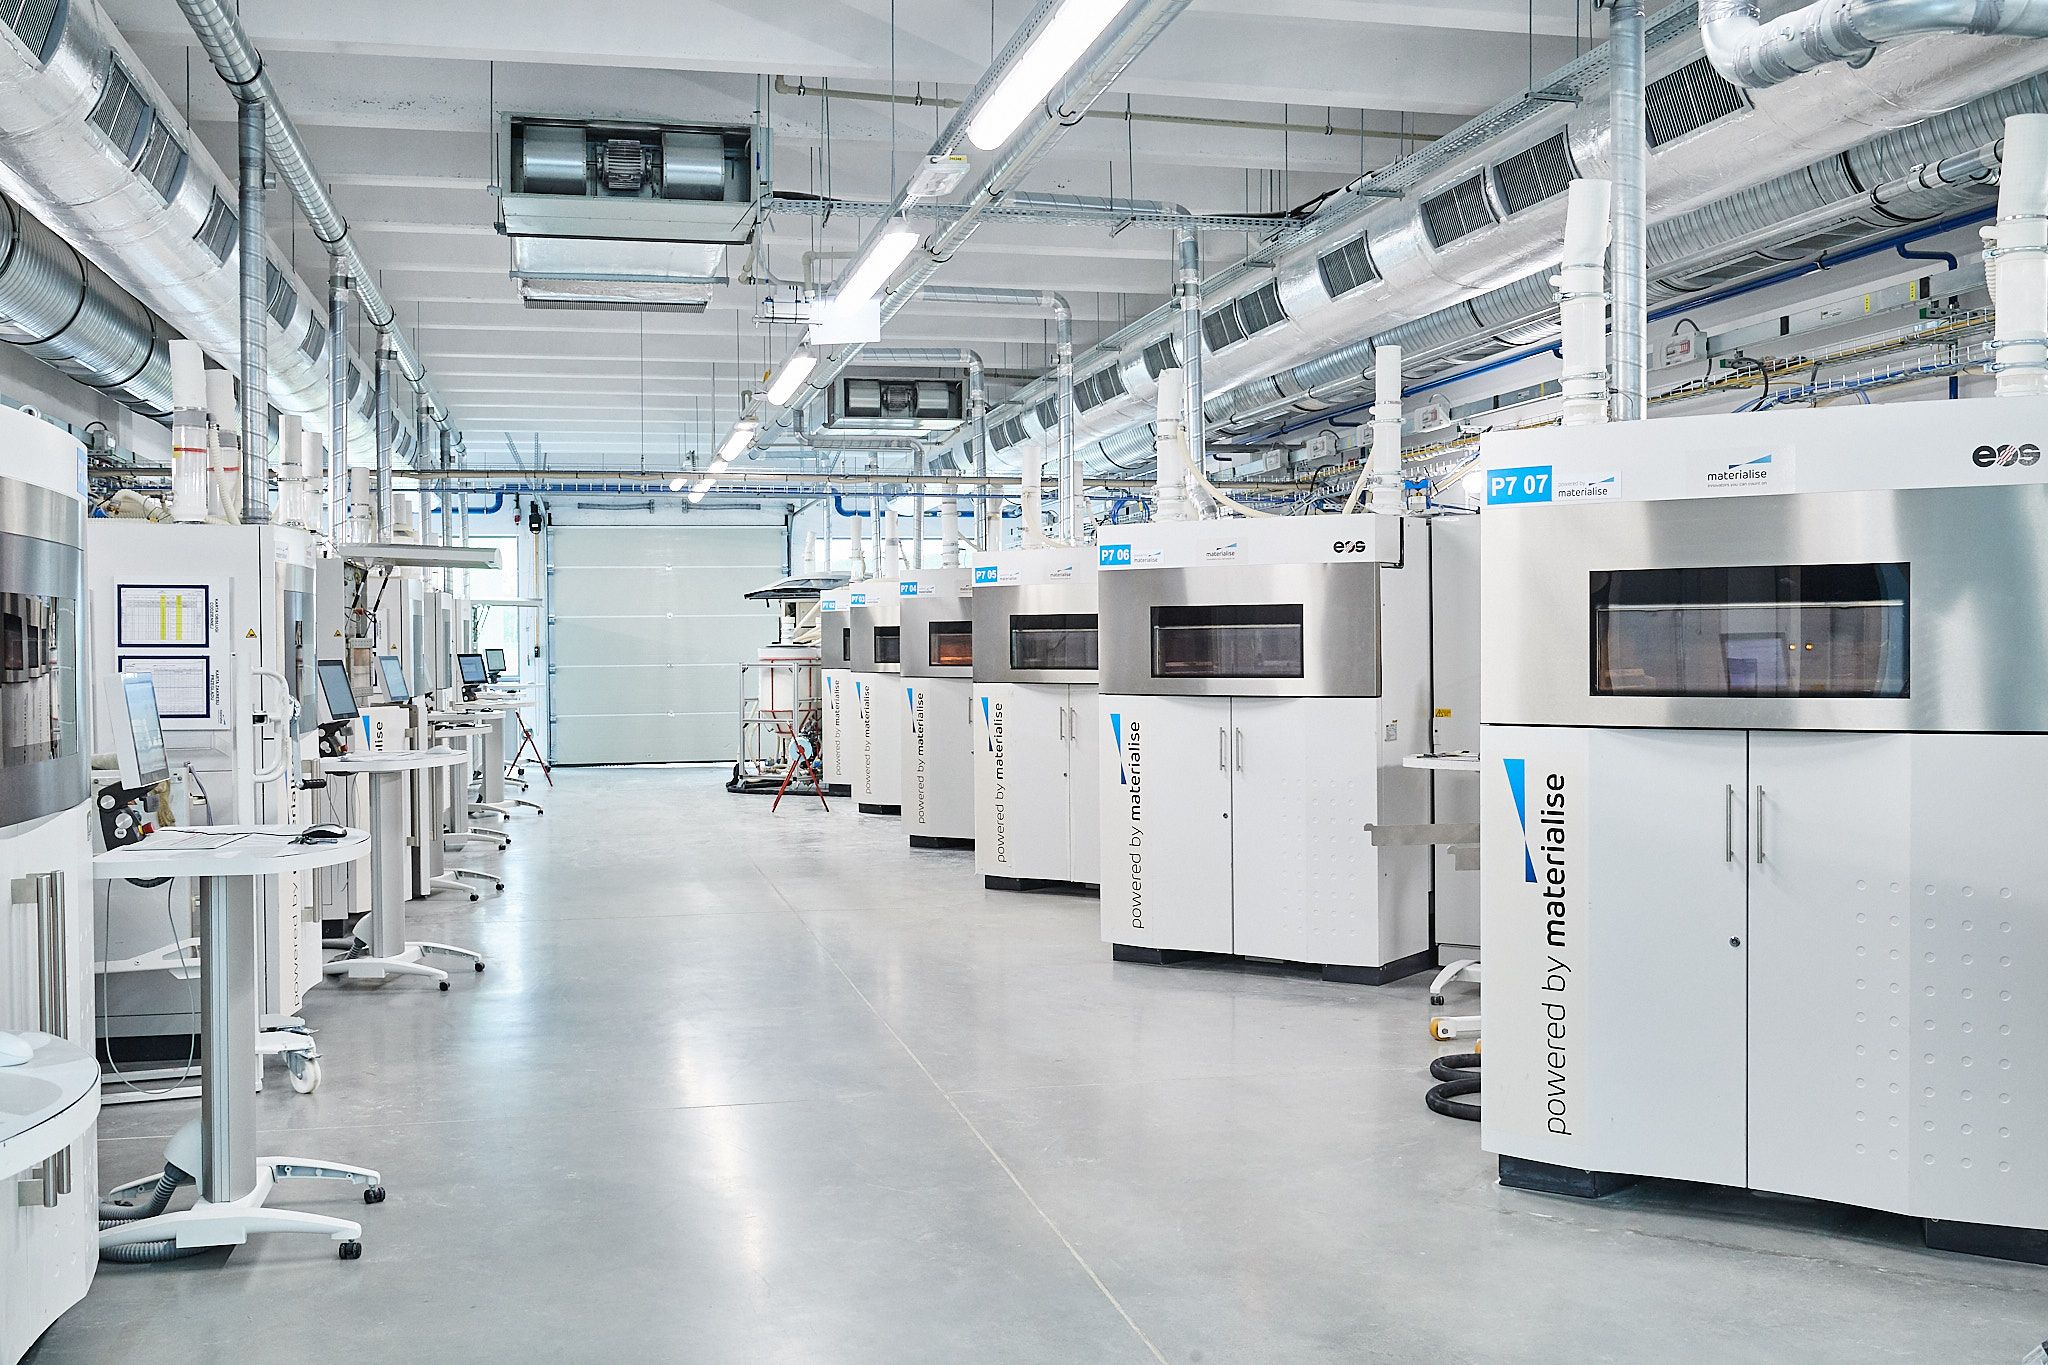 Materialise plans to develop applications with BASF using its 3D printing facilities.